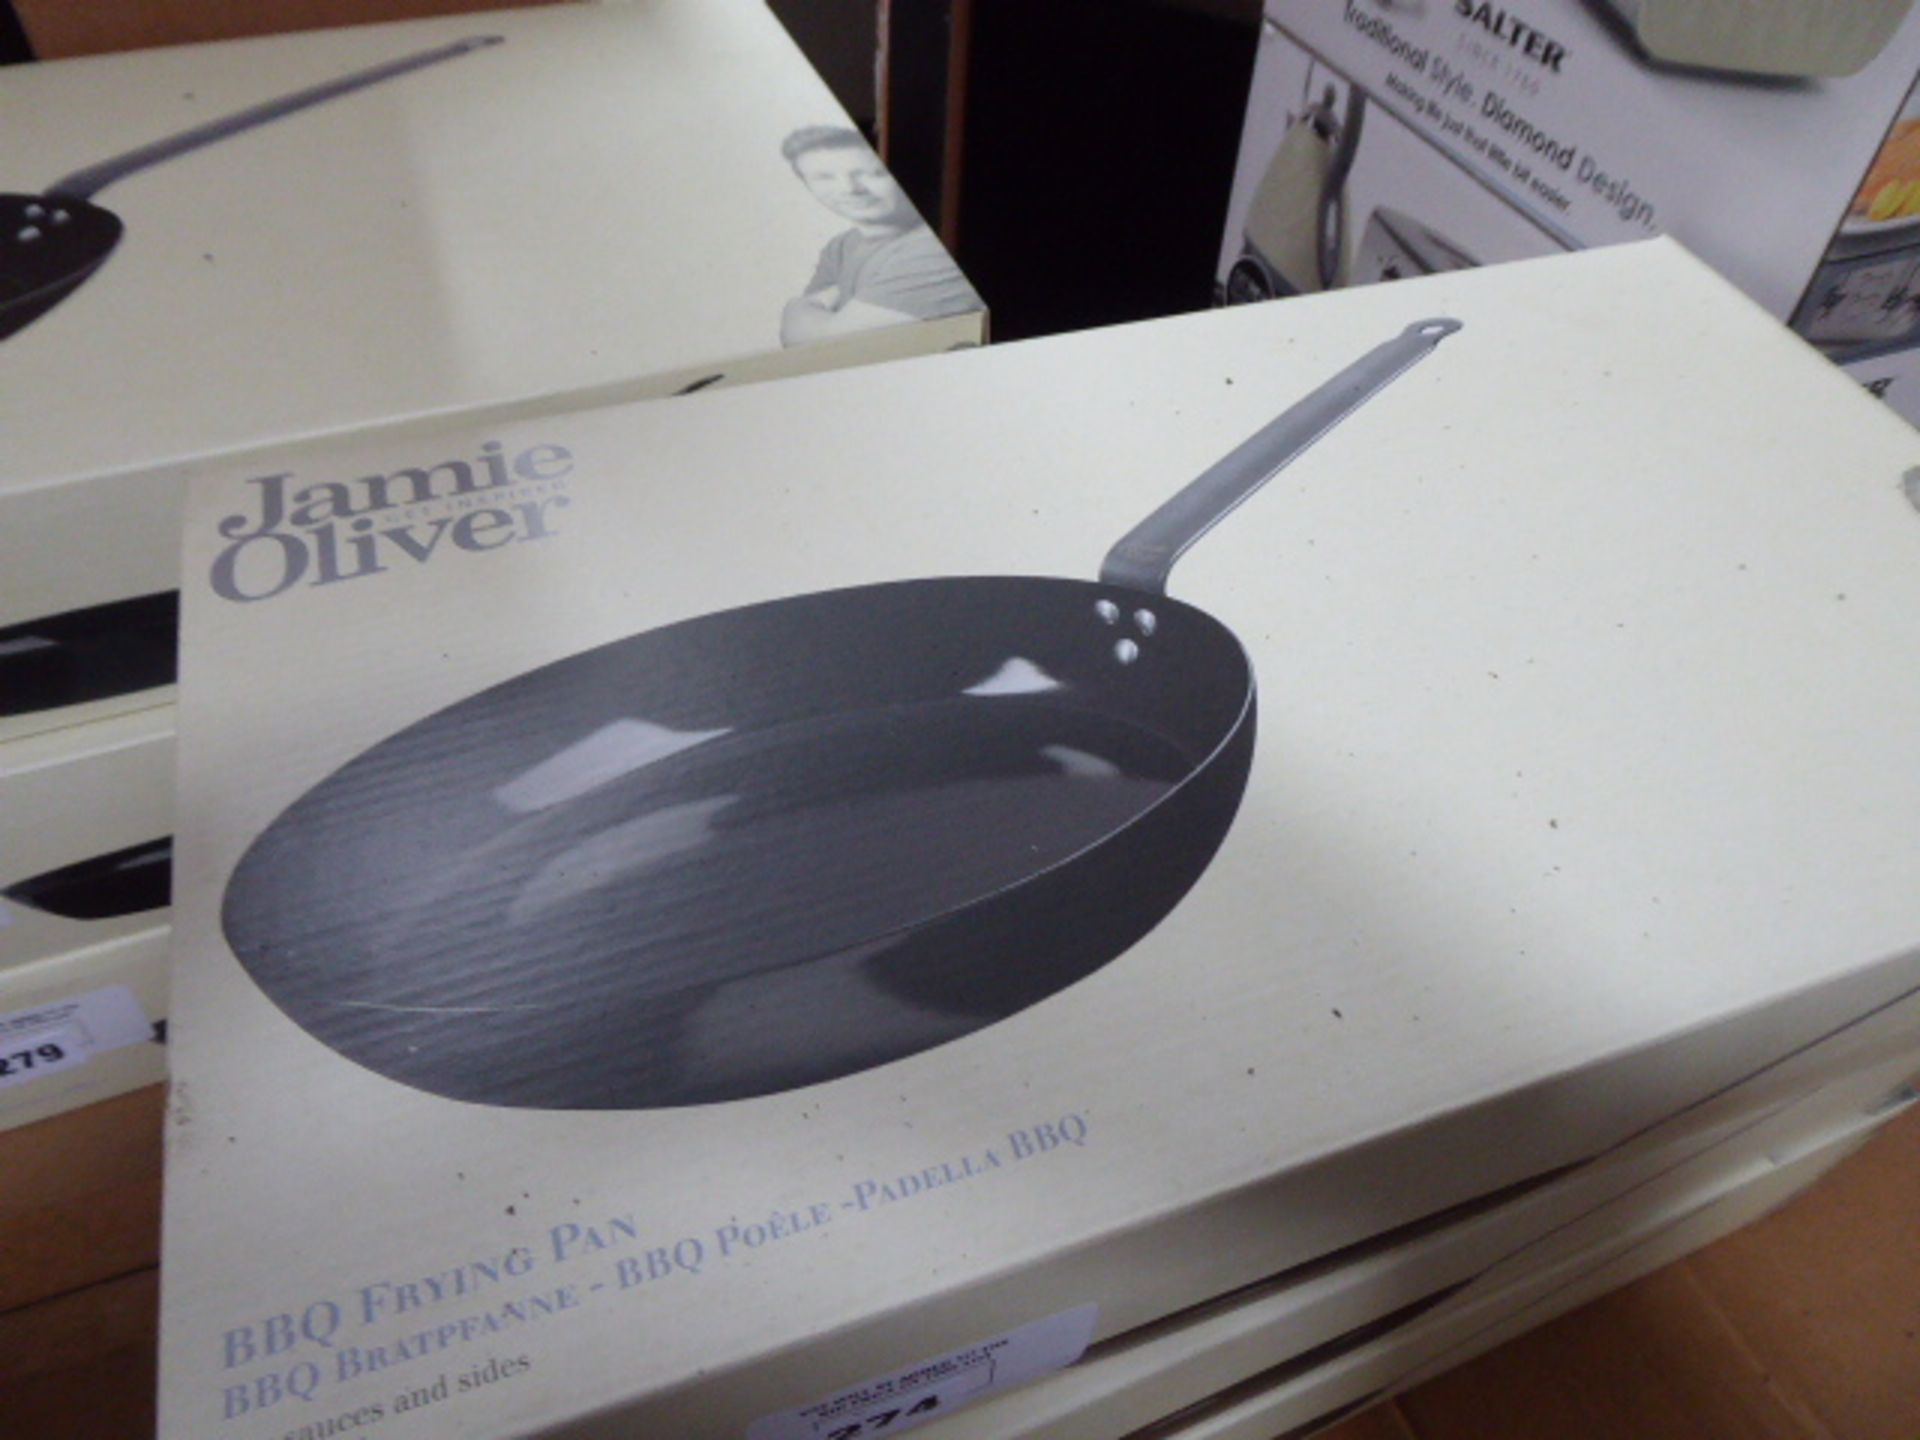 Jamie Oliver barbecue frying pan